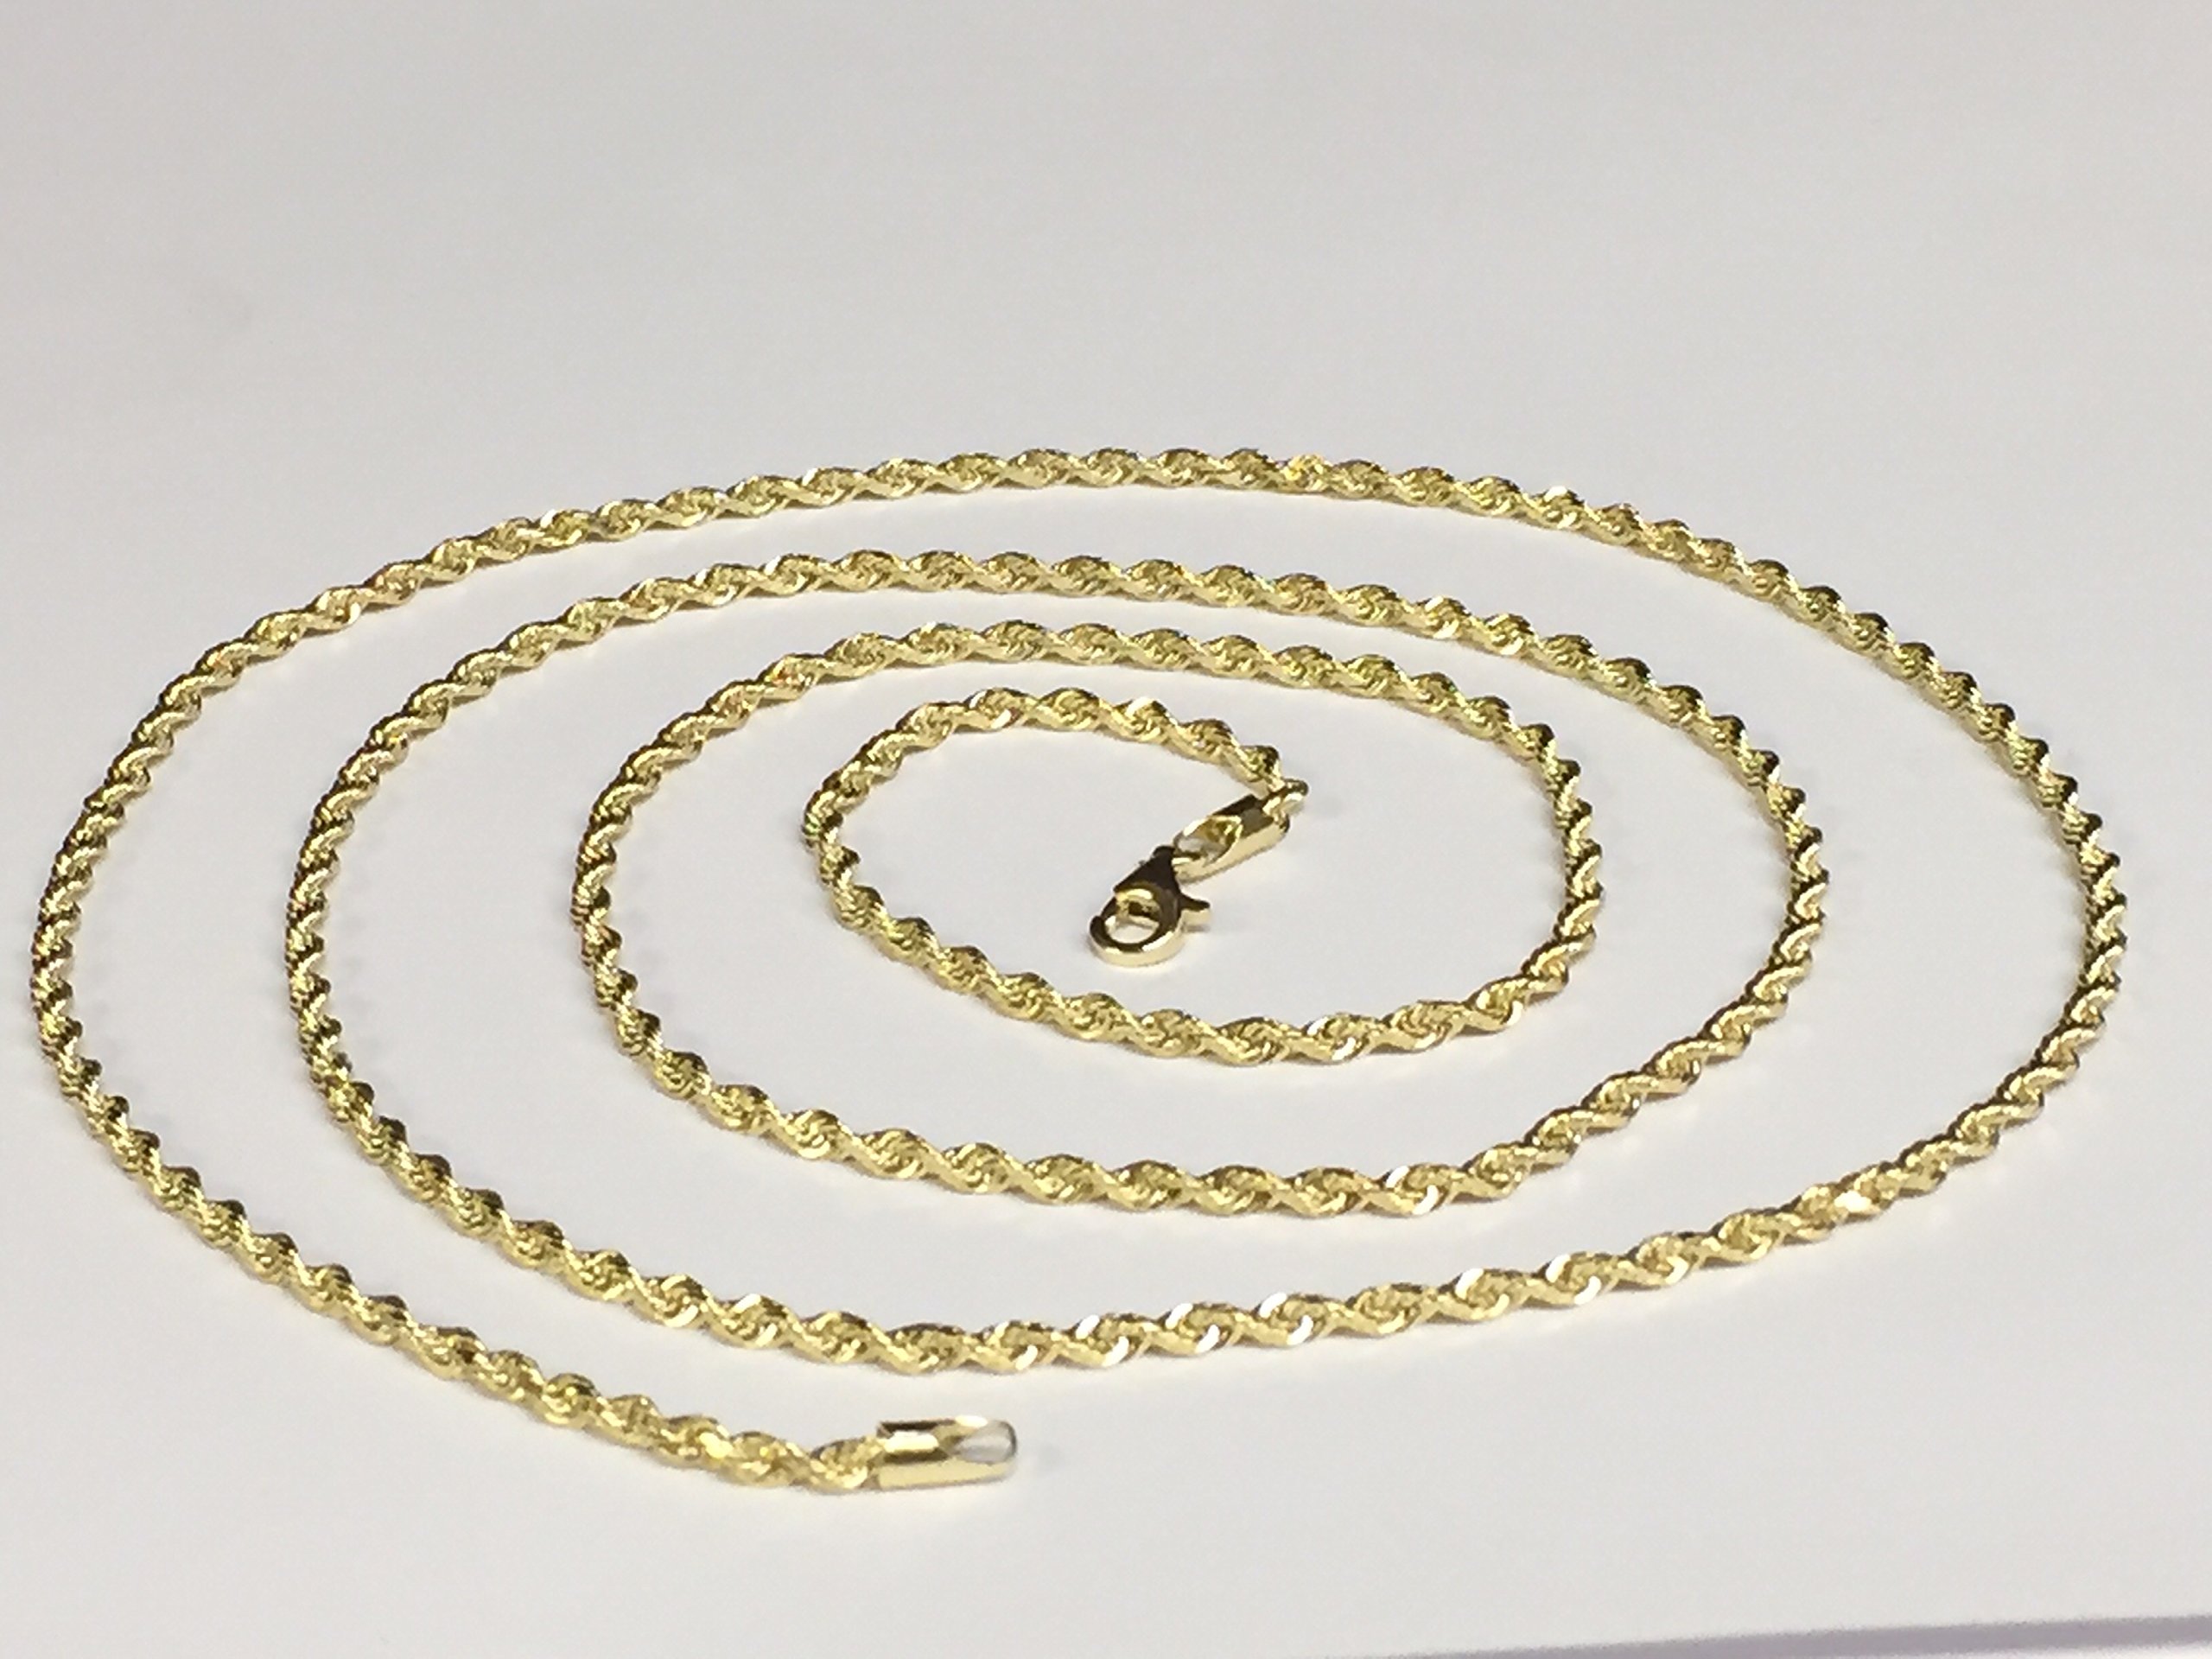 14K Solid Yellow Gold Diamond Cut Rope Pendant Link Chain/Necklace 2.5 Mm (30 Inches)